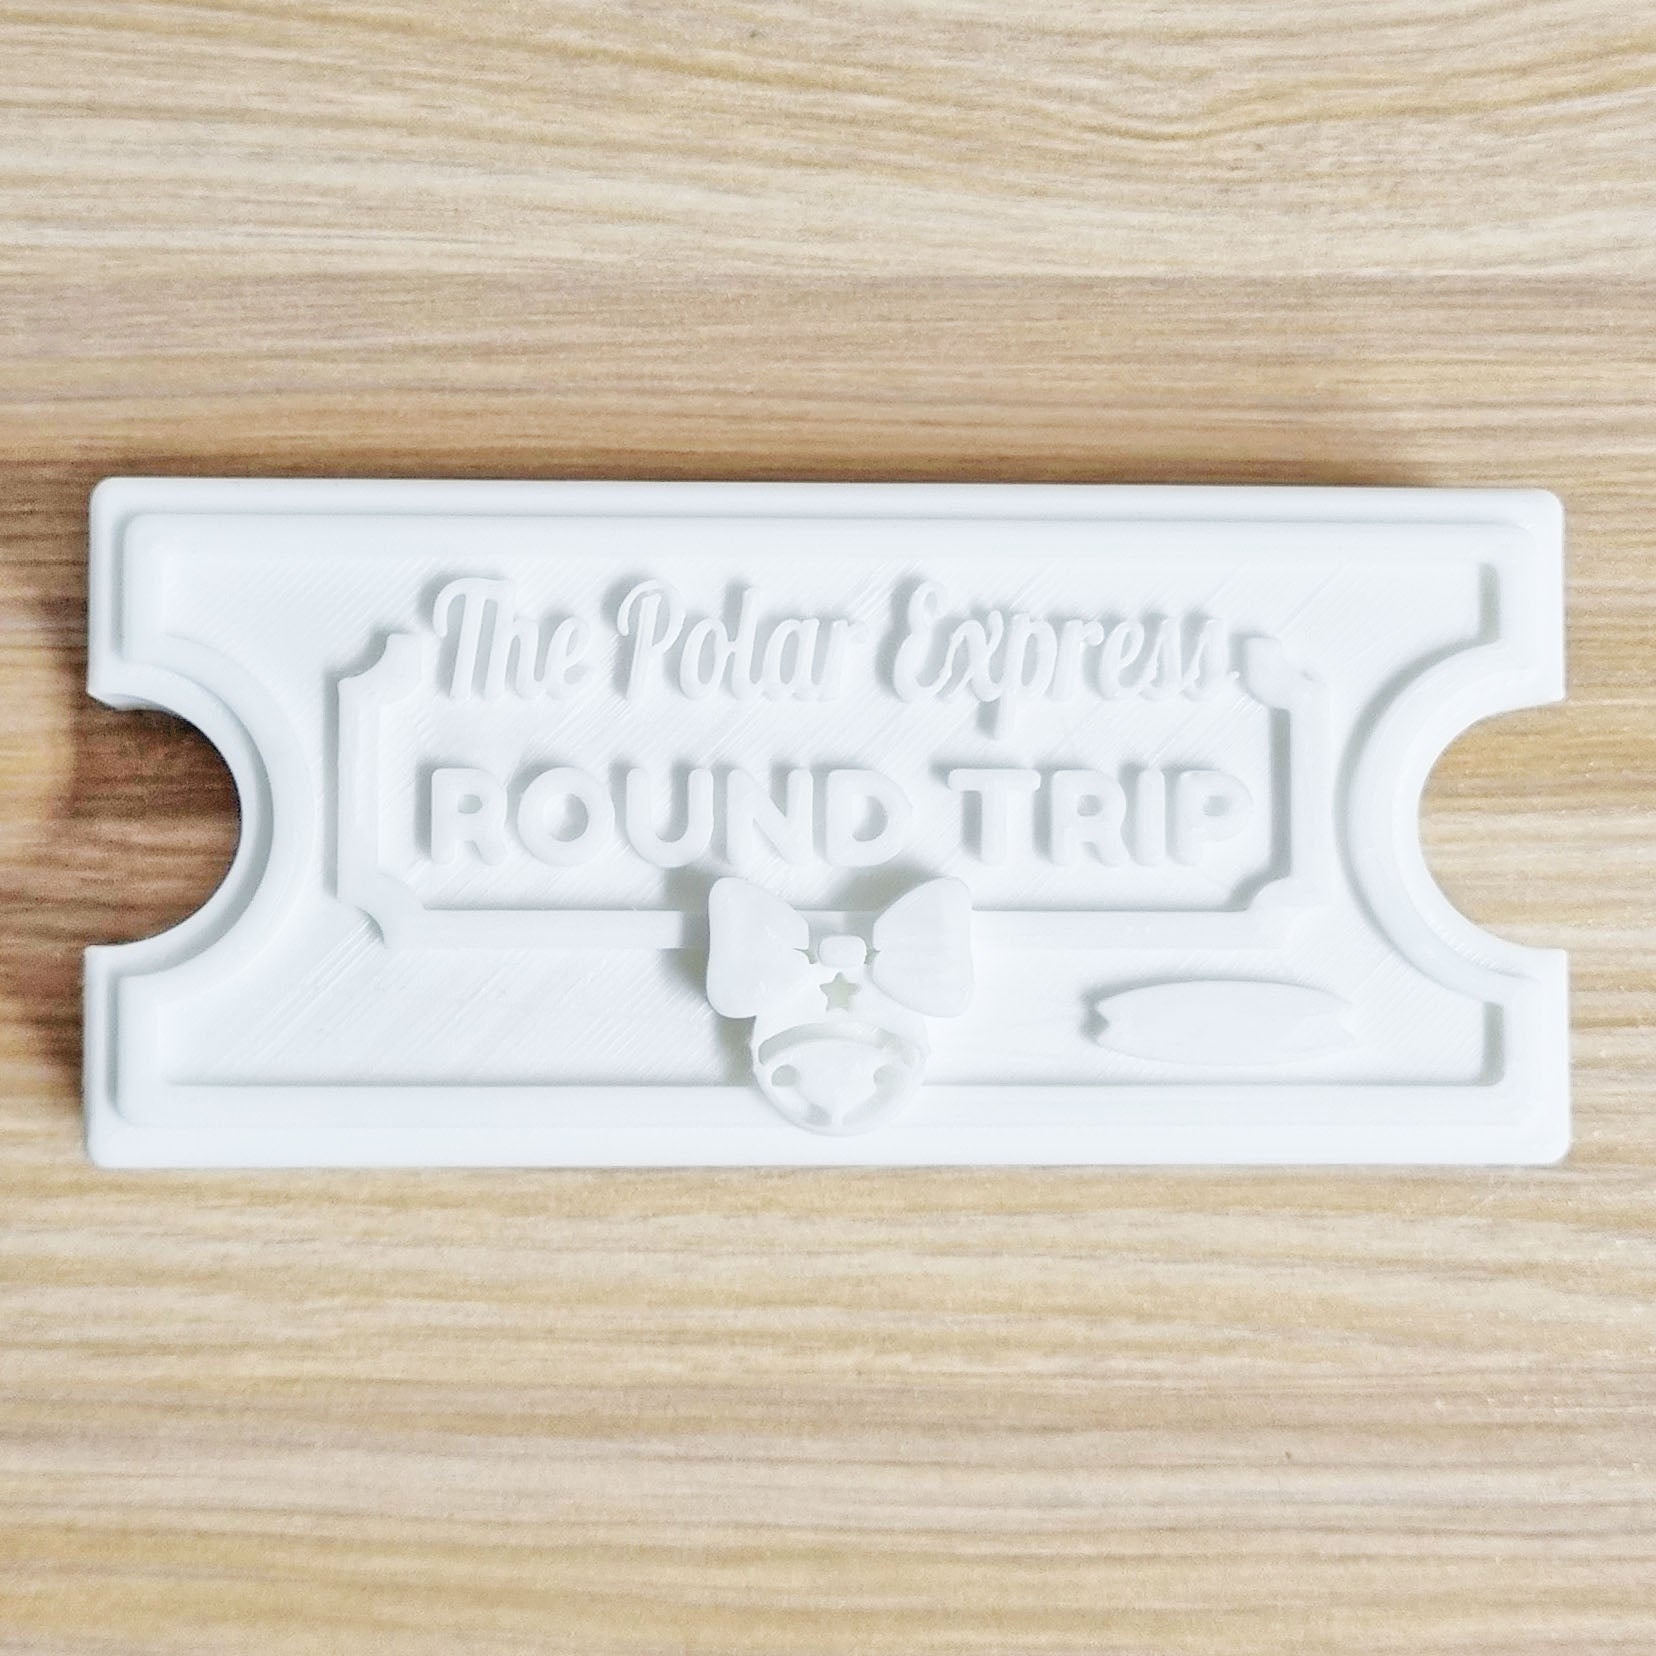 Winter Train Ticket Mould | Truly Personal | Bath Bomb, Soap, Resin, Chocolate, Jelly, Wax Melts Mold